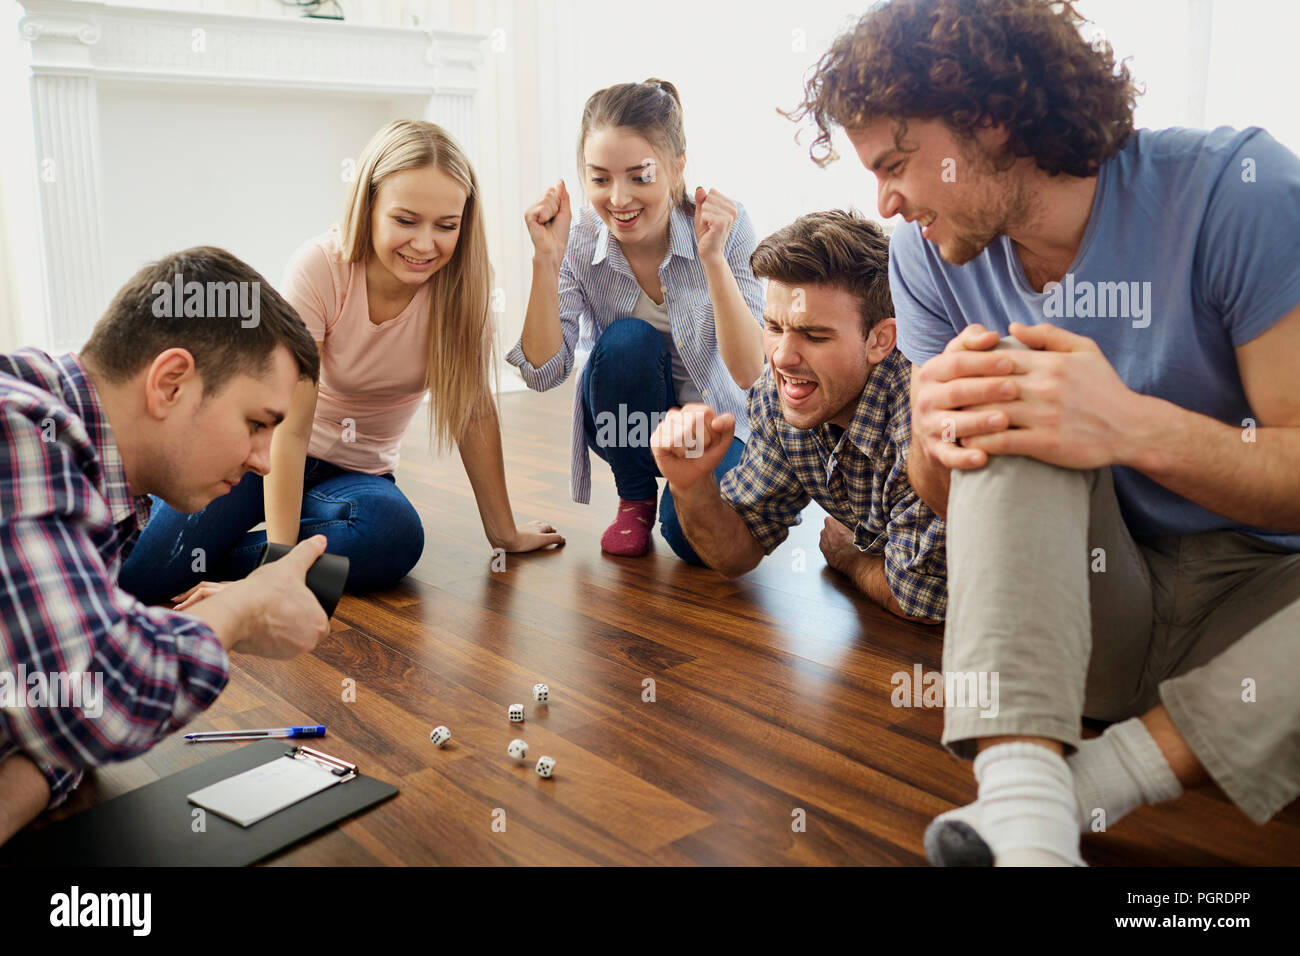 A group of friends play board games on the floor indoors. Stock Photo